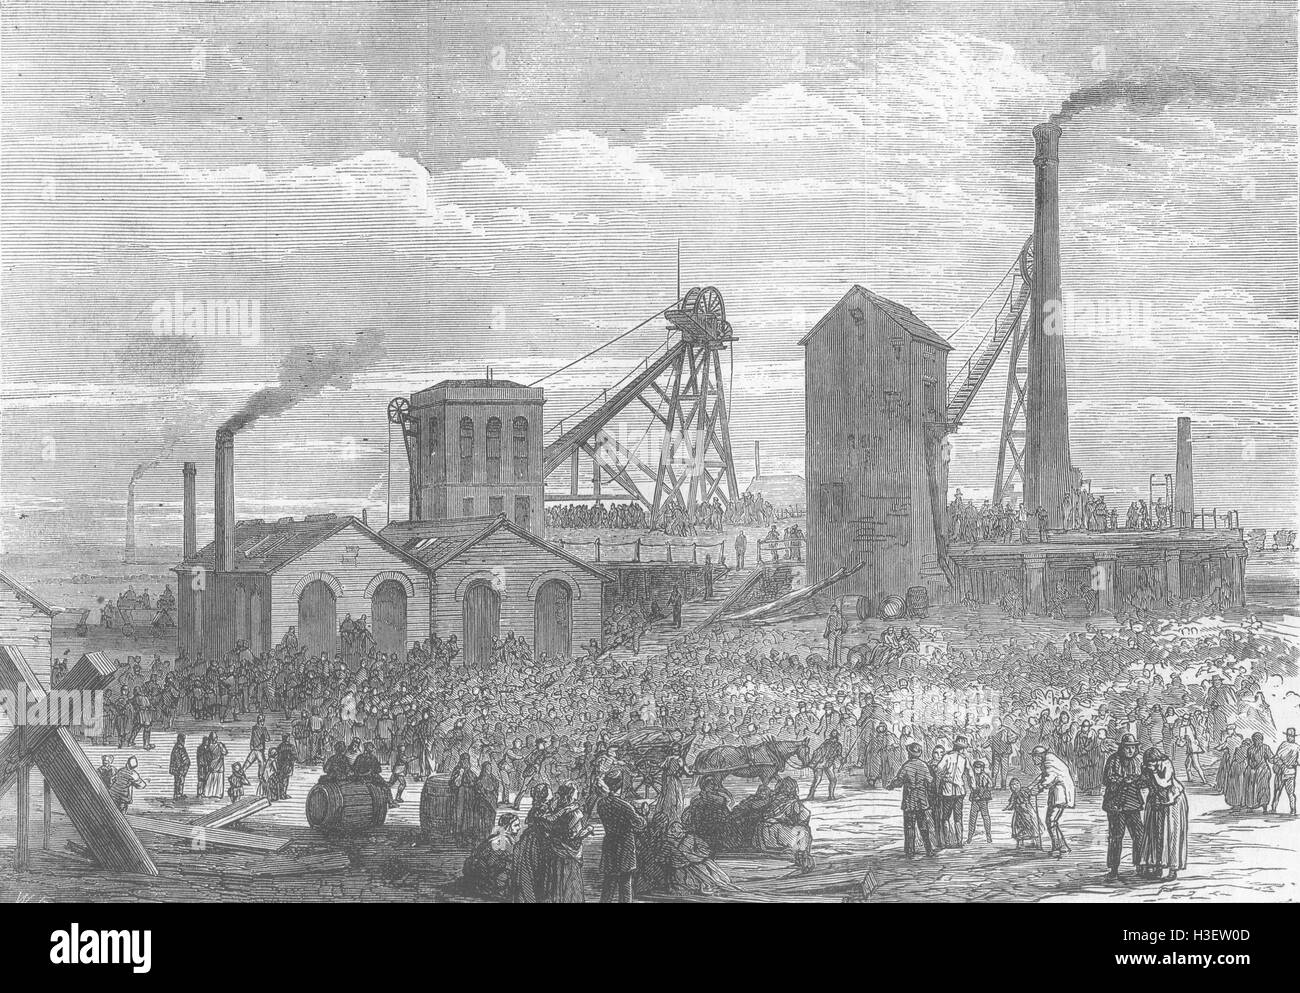 LANCS Astley colliery, Dukinfield explosion 1874. Illustrated London News Stock Photo